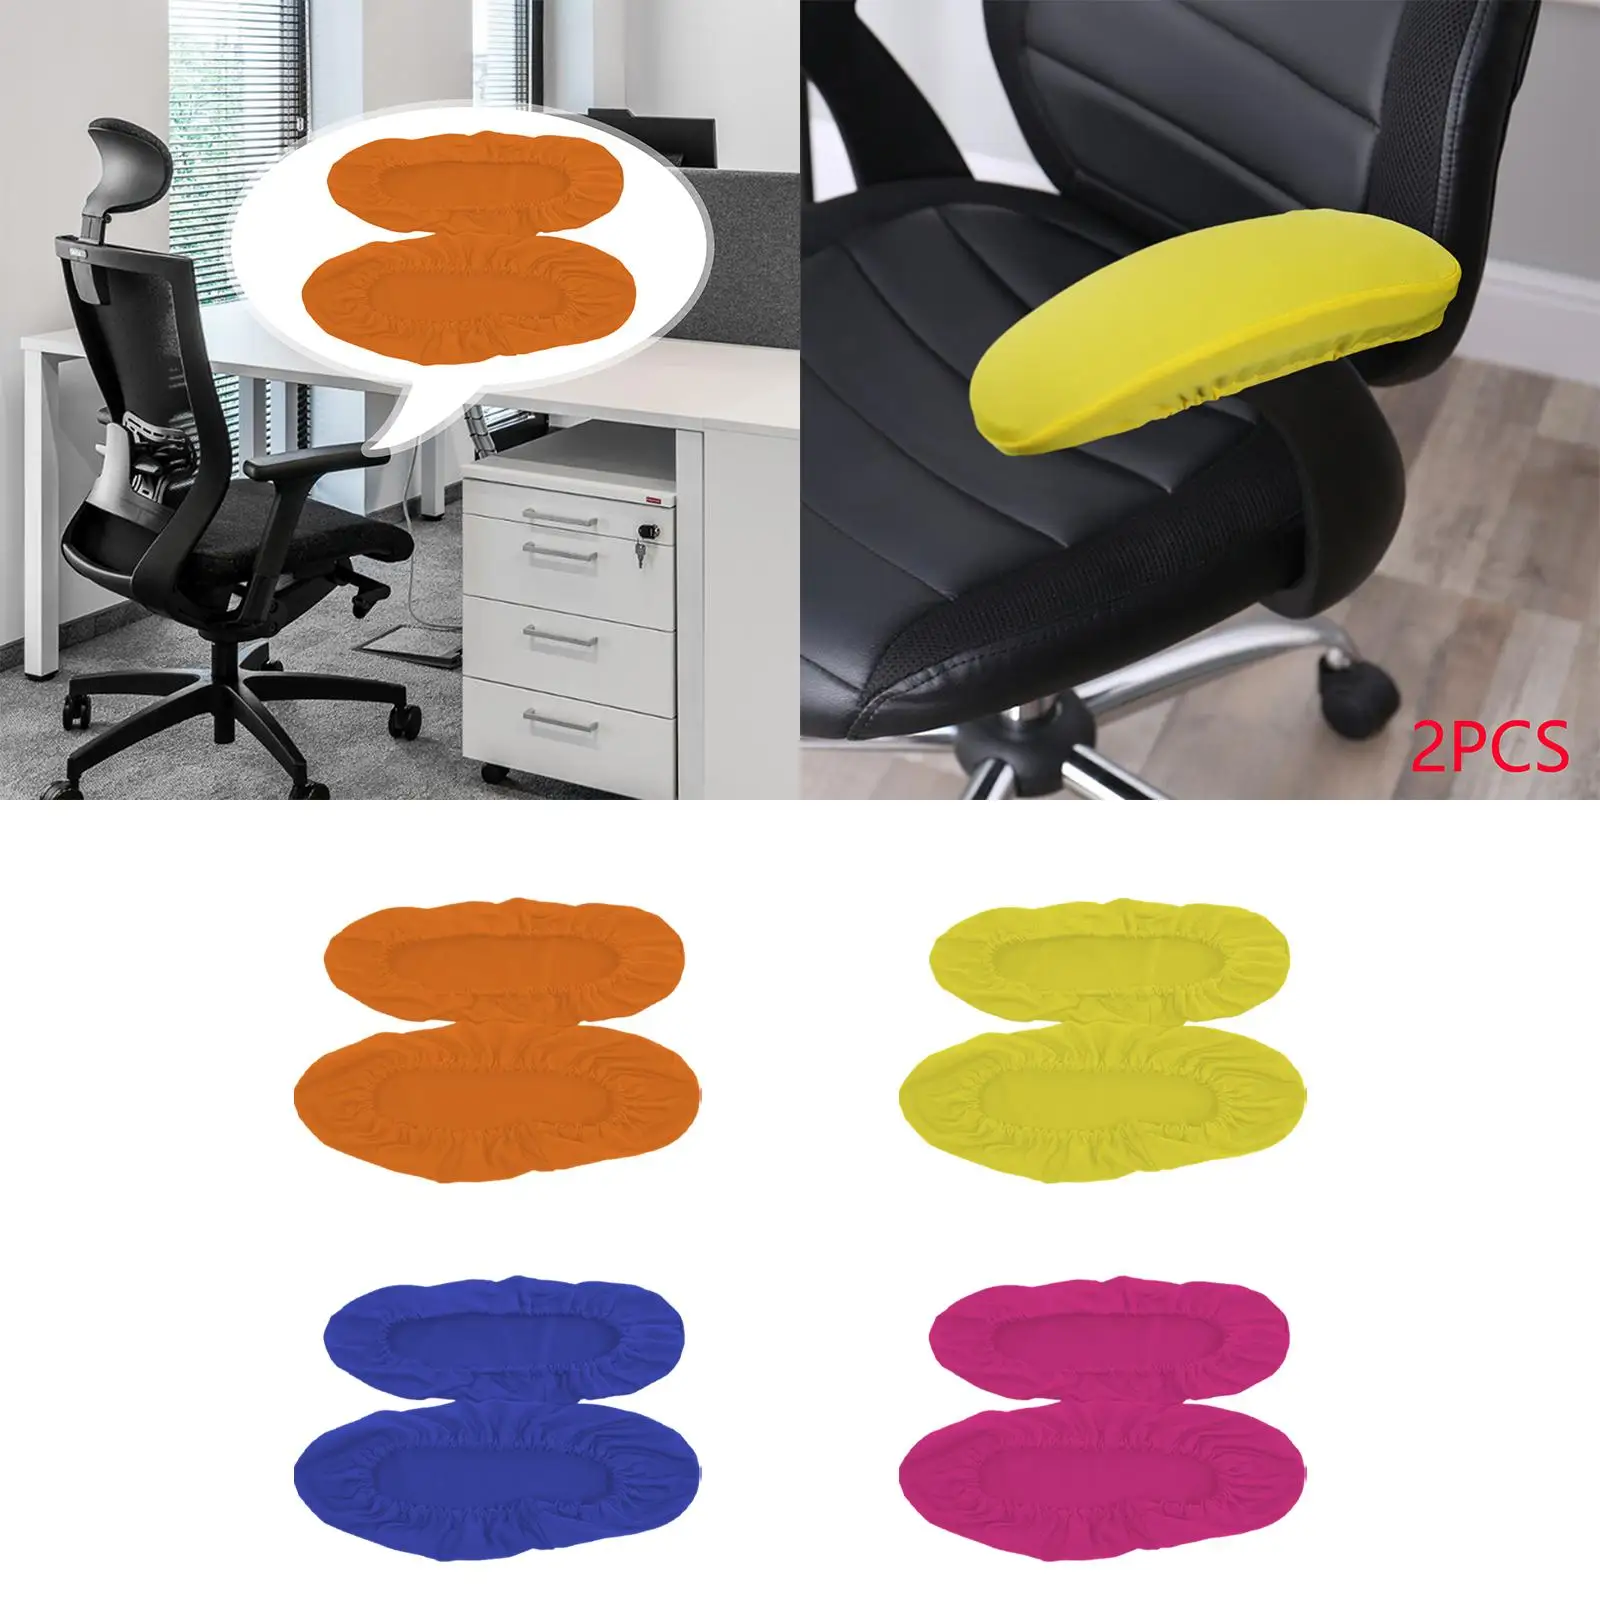 2x Office Chair Arm Covers Arm Rest Covering Removable Elastic Armrest Covers for Computer Gaming Chairs Office Desk Chairs Home